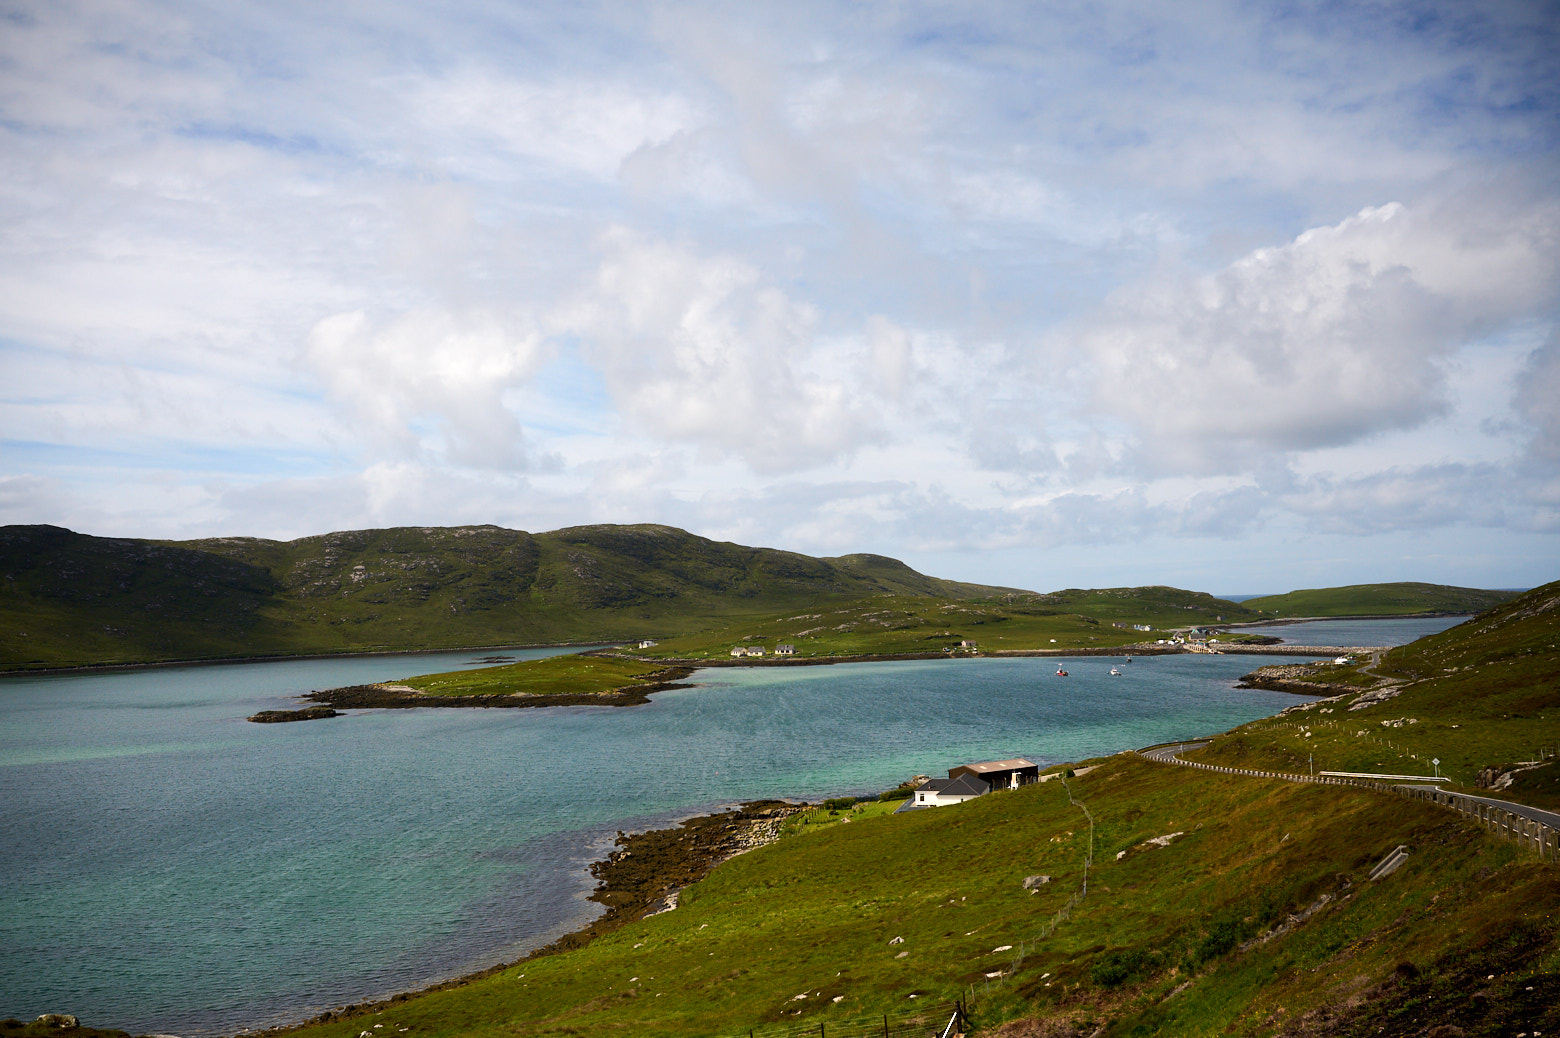 Driving to the Isle of Vatersay in the Outer Hebrides.